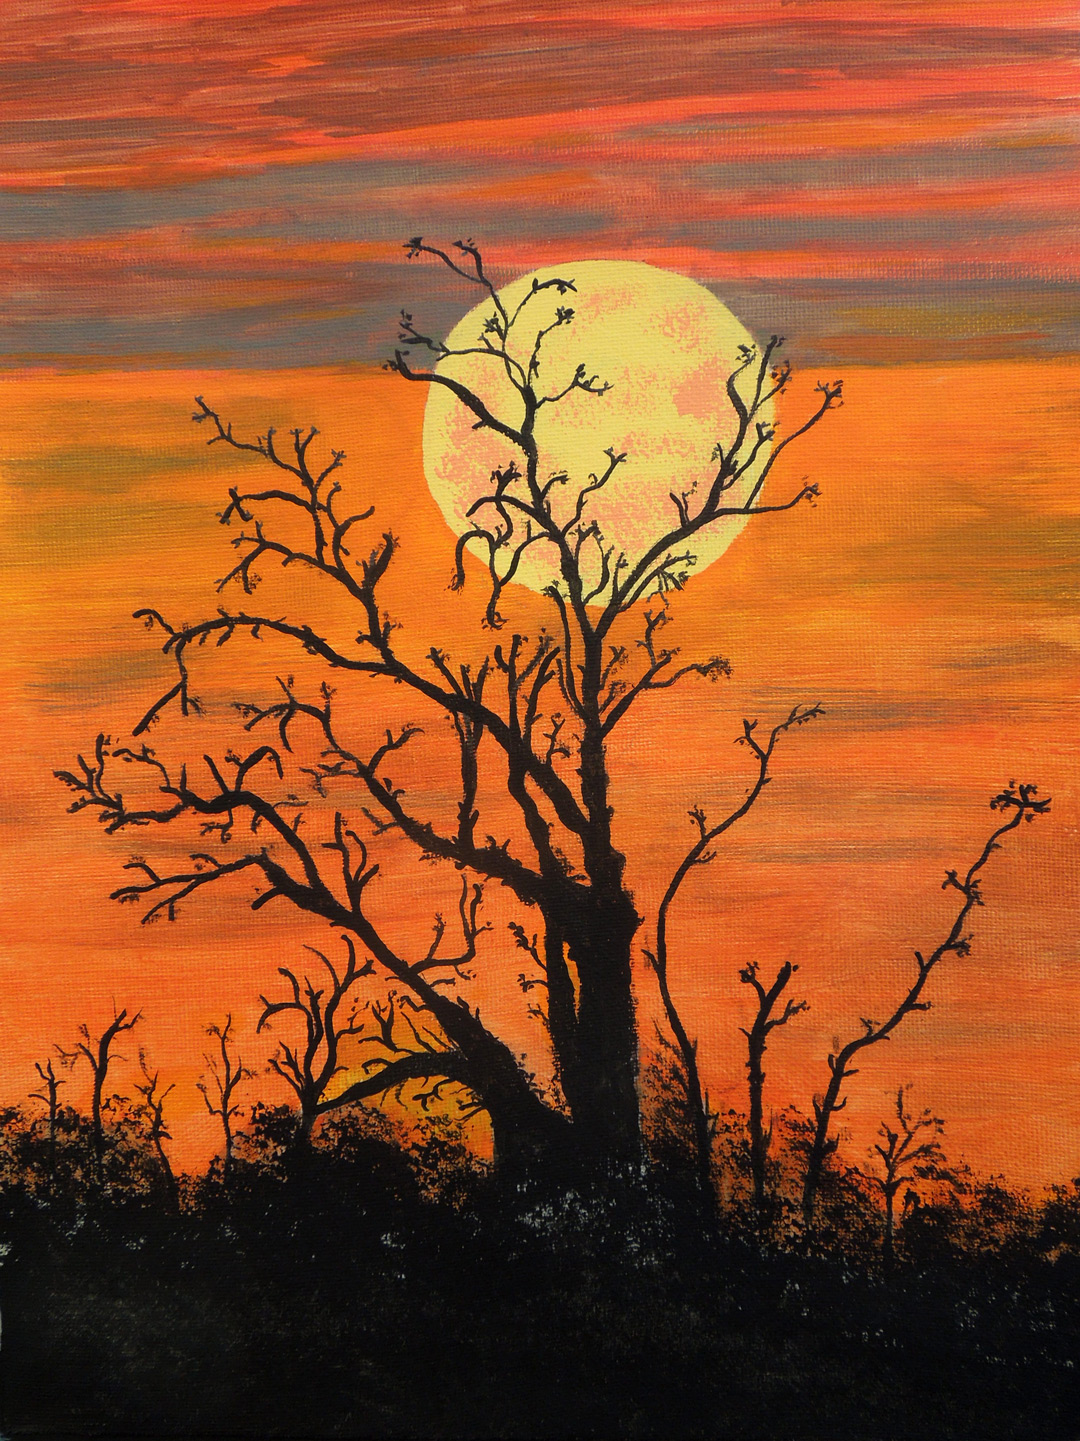 A yellow moon hangs in an orange and red sky with barren trees in front of it.